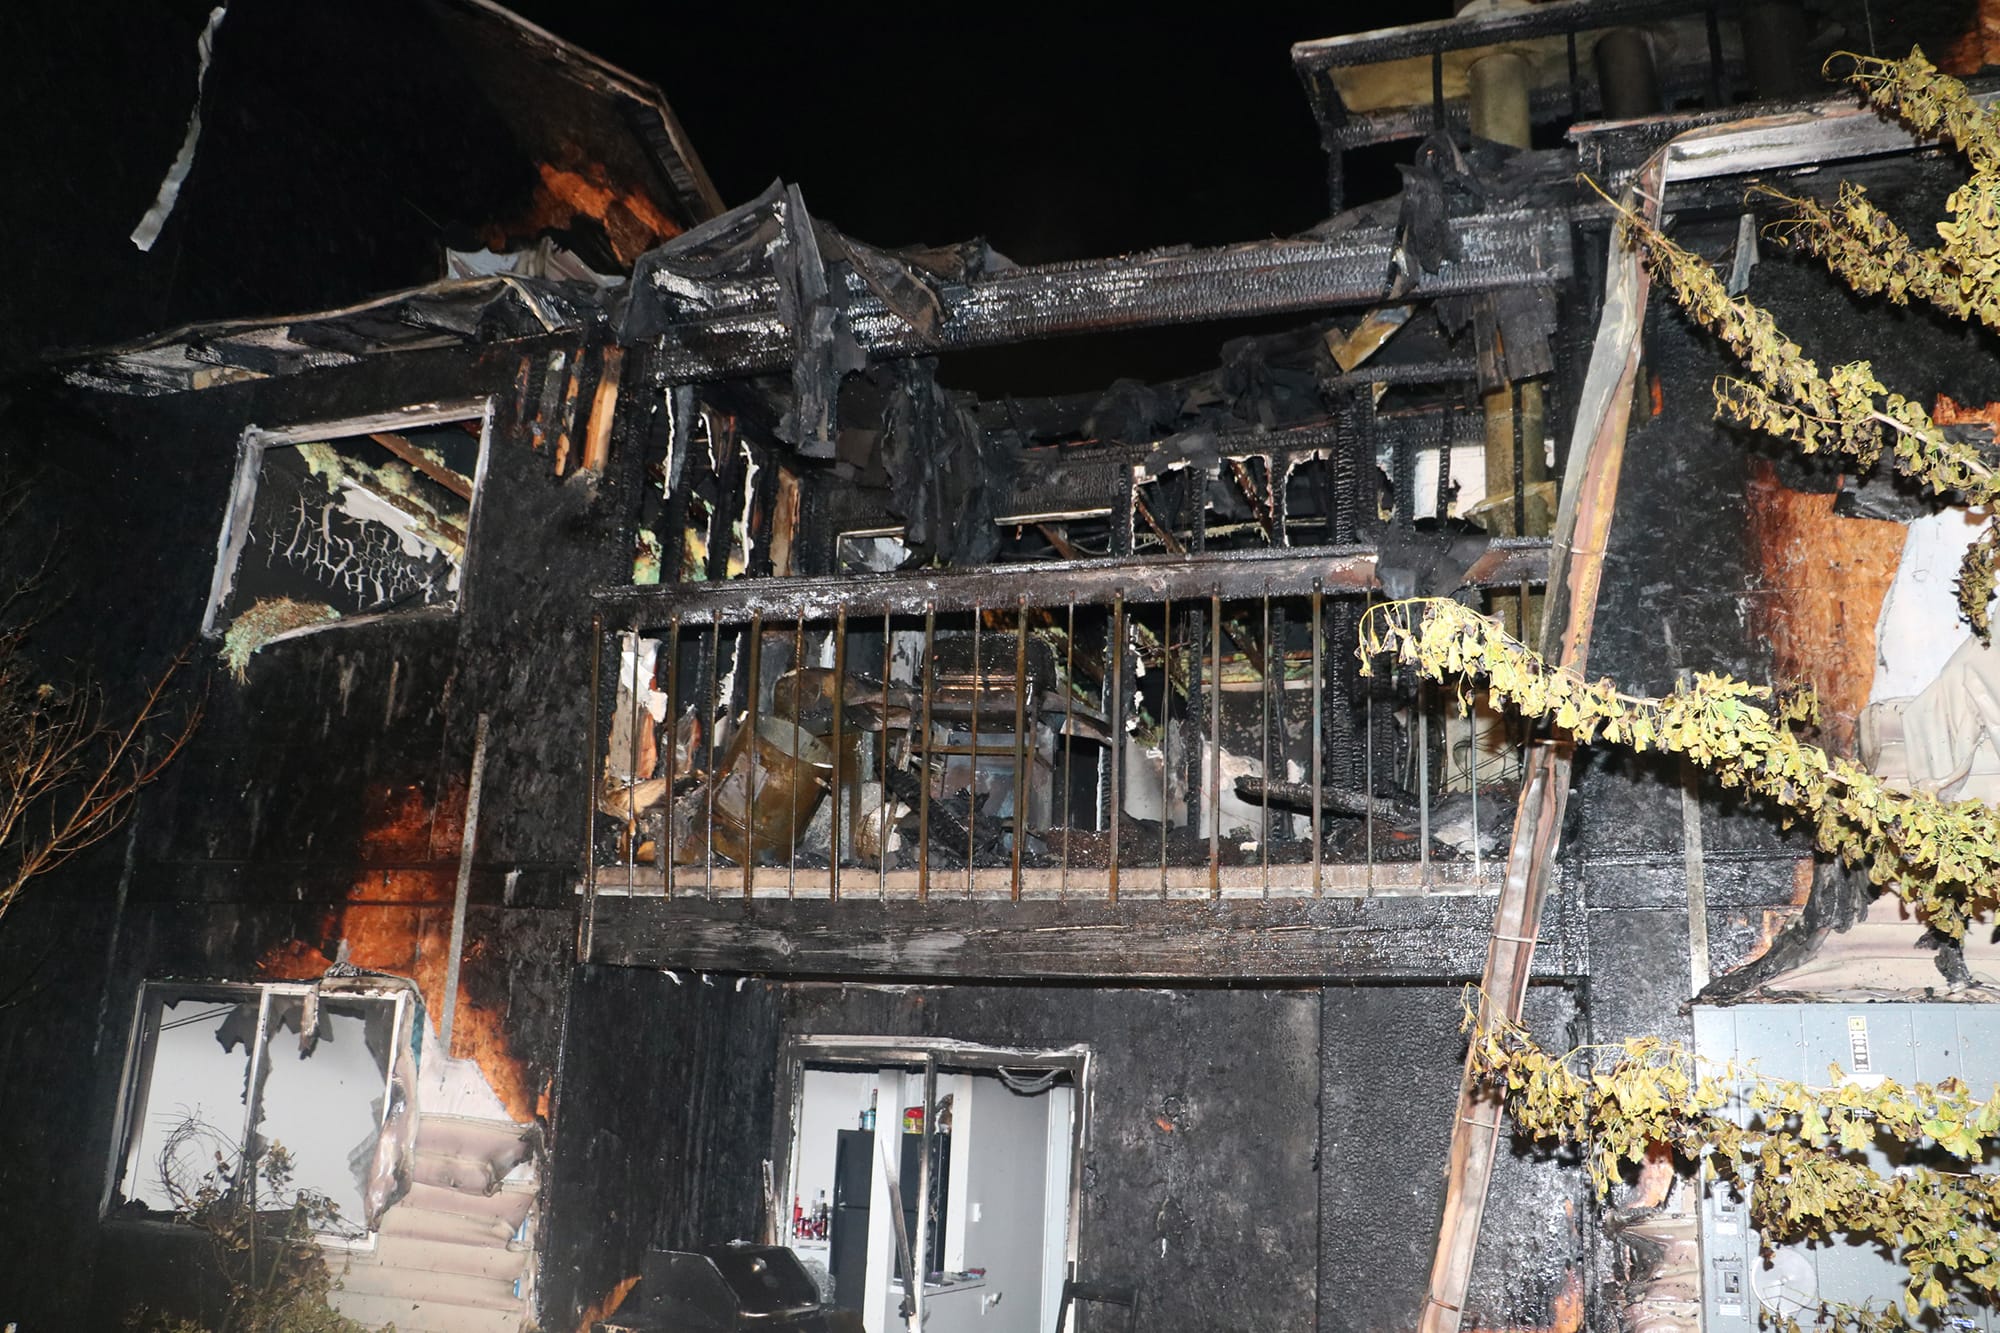 A two-alarm fire that heavily damaged a Sunpointe Apartments building, displacing more than 25 residents, was caused by improperly discarded smoking materials, according to the Vancouver Fire Marshal’s Office.